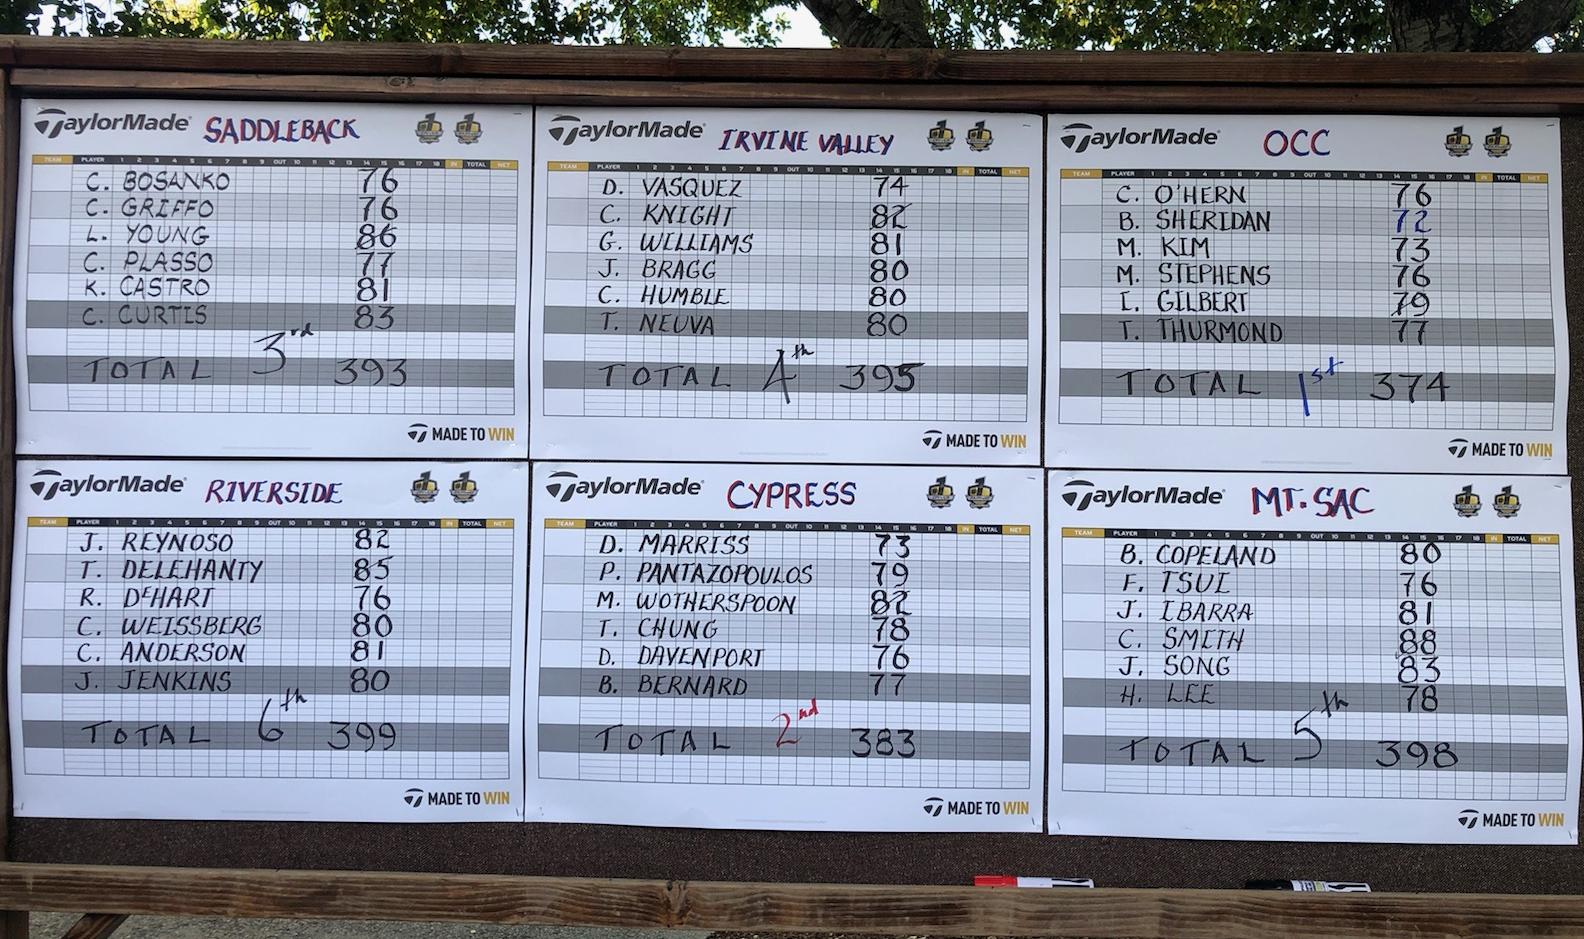 Men's golf team finishes strong at Arroyo Trabuco